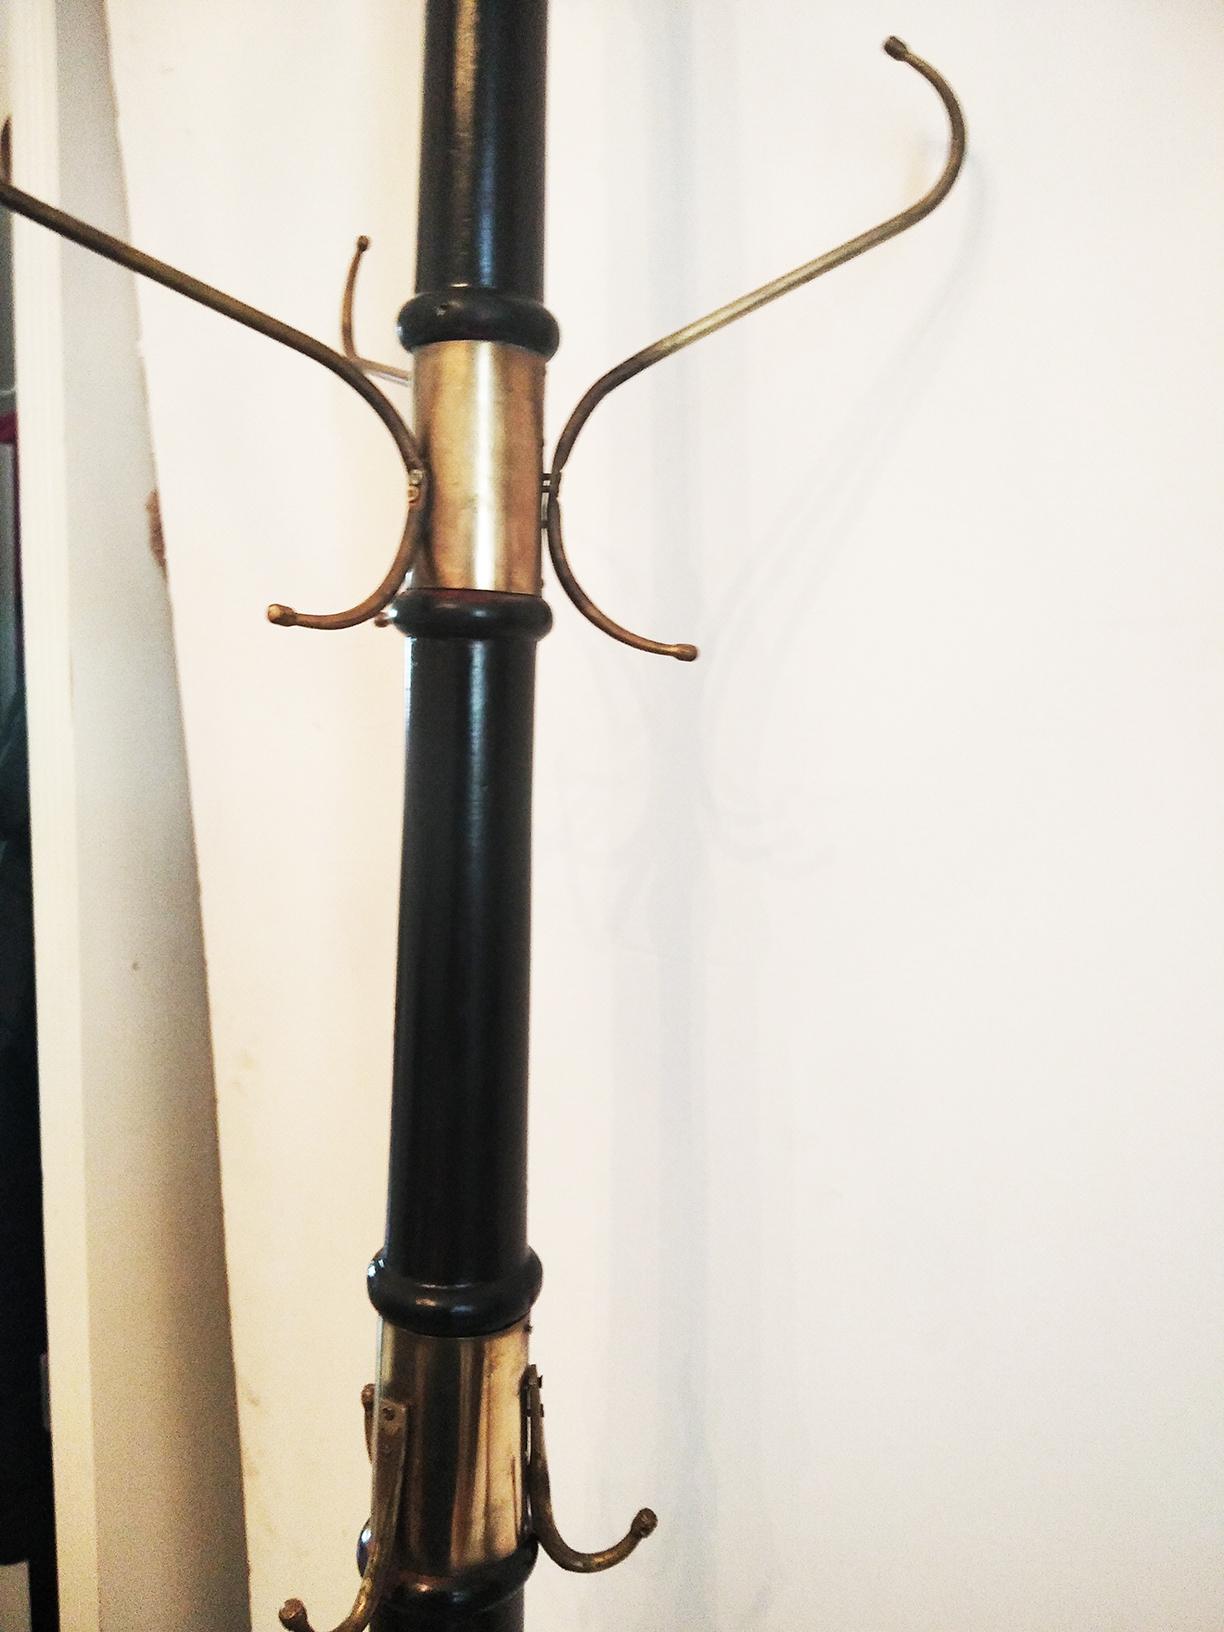 Tree type stand coat, very tall in ebonized wood and bronze or brass

It has several hangers in different heights to hang from the hat on top, coats, bags and canes

It is spectacular and very practical with great capacity
late 19th or early